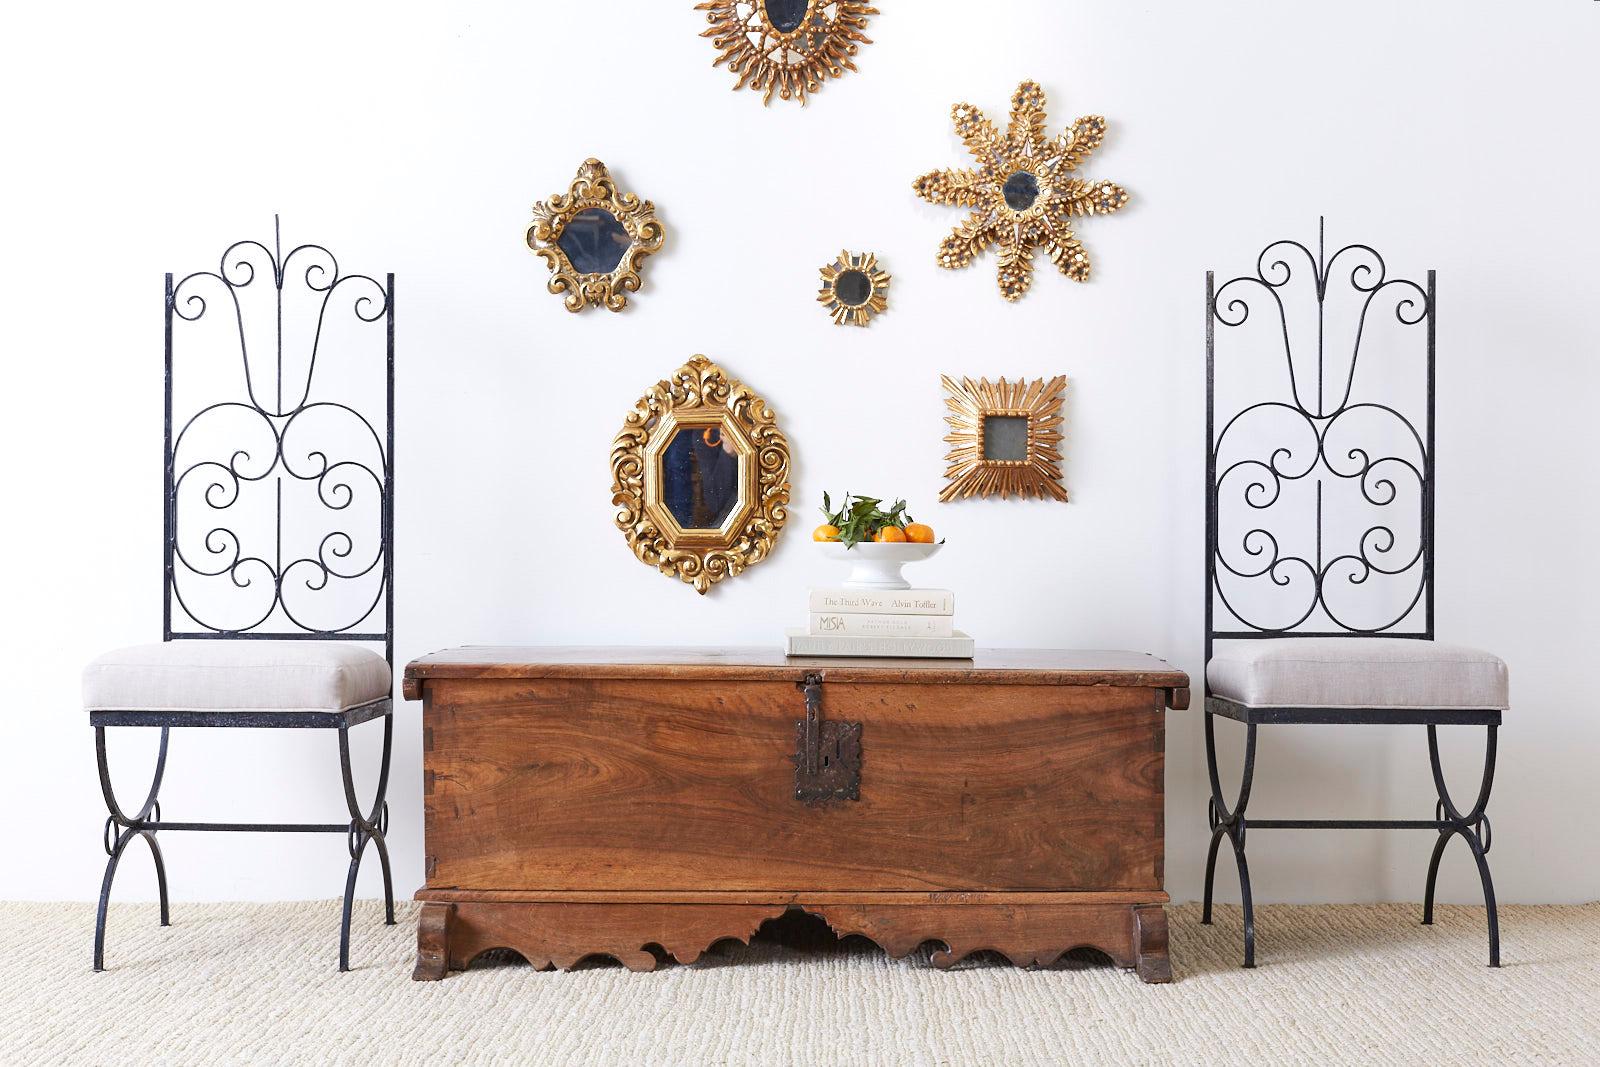 Fantastic assembled set hand carved Italian giltwood mirrors made in the Baroque taste. The set consists of 2 small starburst mirrors, 1 square, 3 medium, 2 large stars, 1 oblong, and 1 large mirror. The mirrors feature an aged patina on the finish